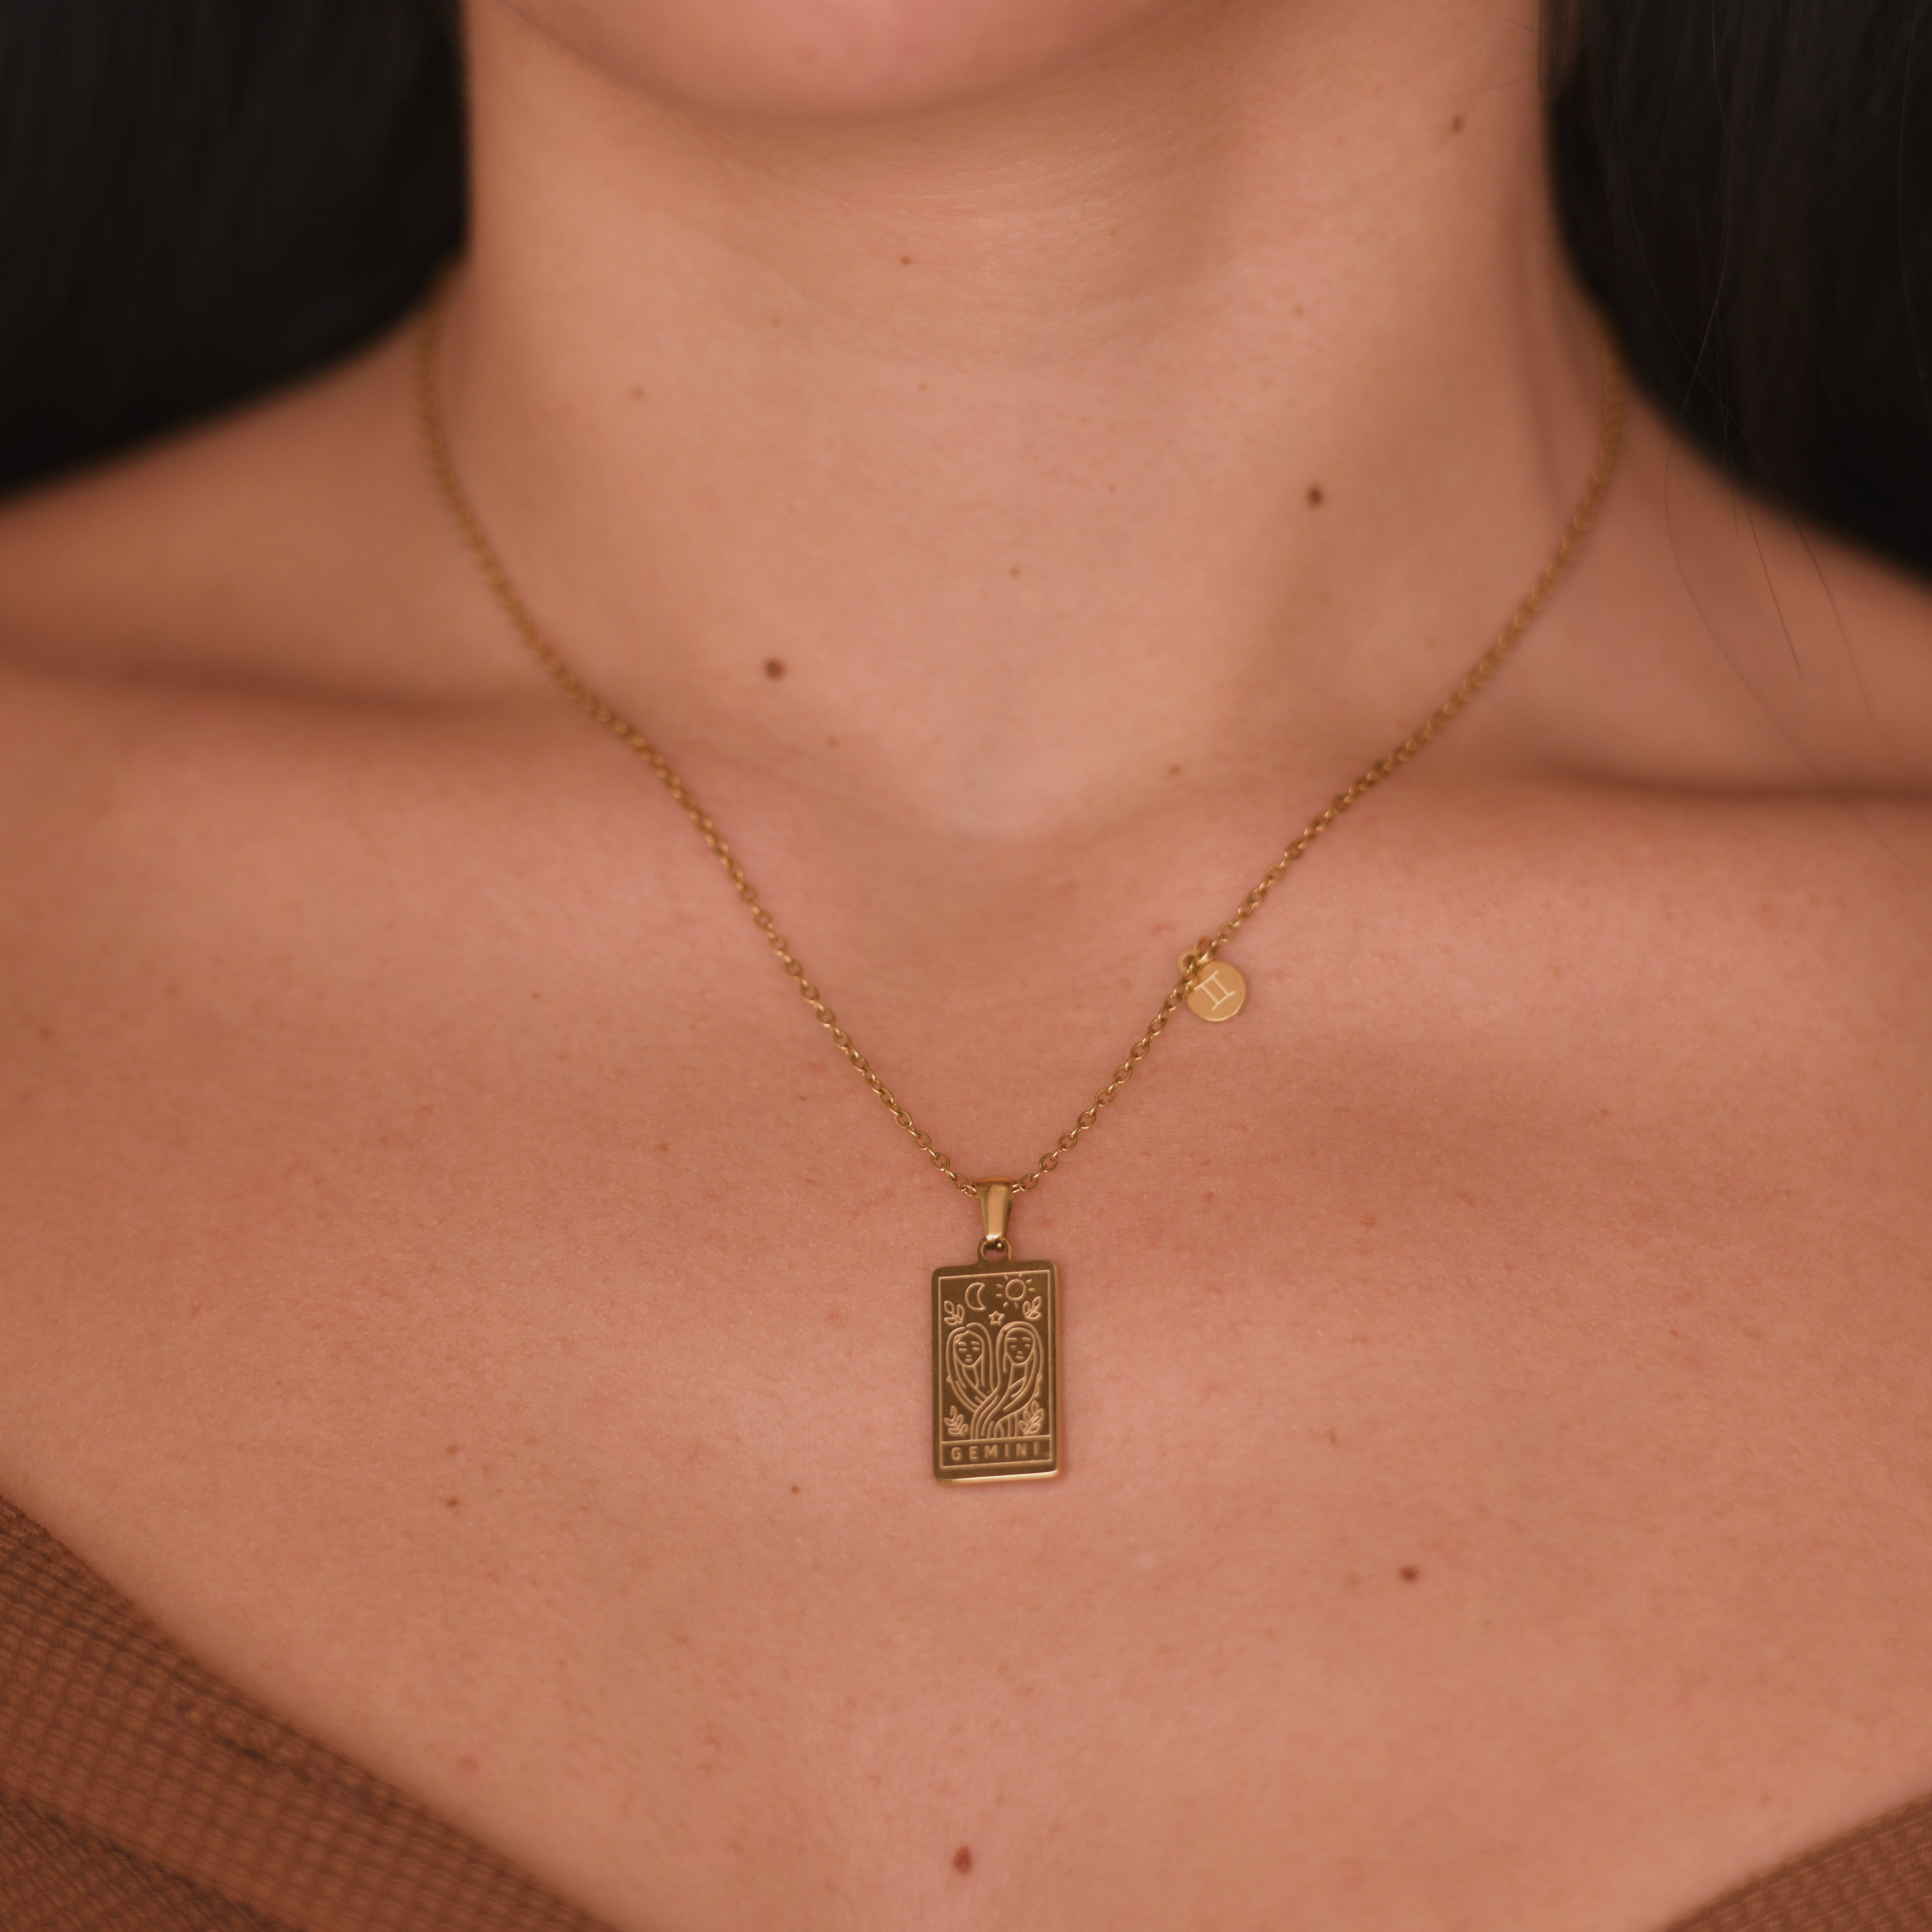 GEMINI Zodiac Pendant Gold Necklace - Gold chain necklace with gemini engraved in a vertical rectangular shape pendant. at the bottom of the pendant is engraved the word "gemini". on the side of the pendant at the chain is attched a square charm with gemini symbol engraved on it.